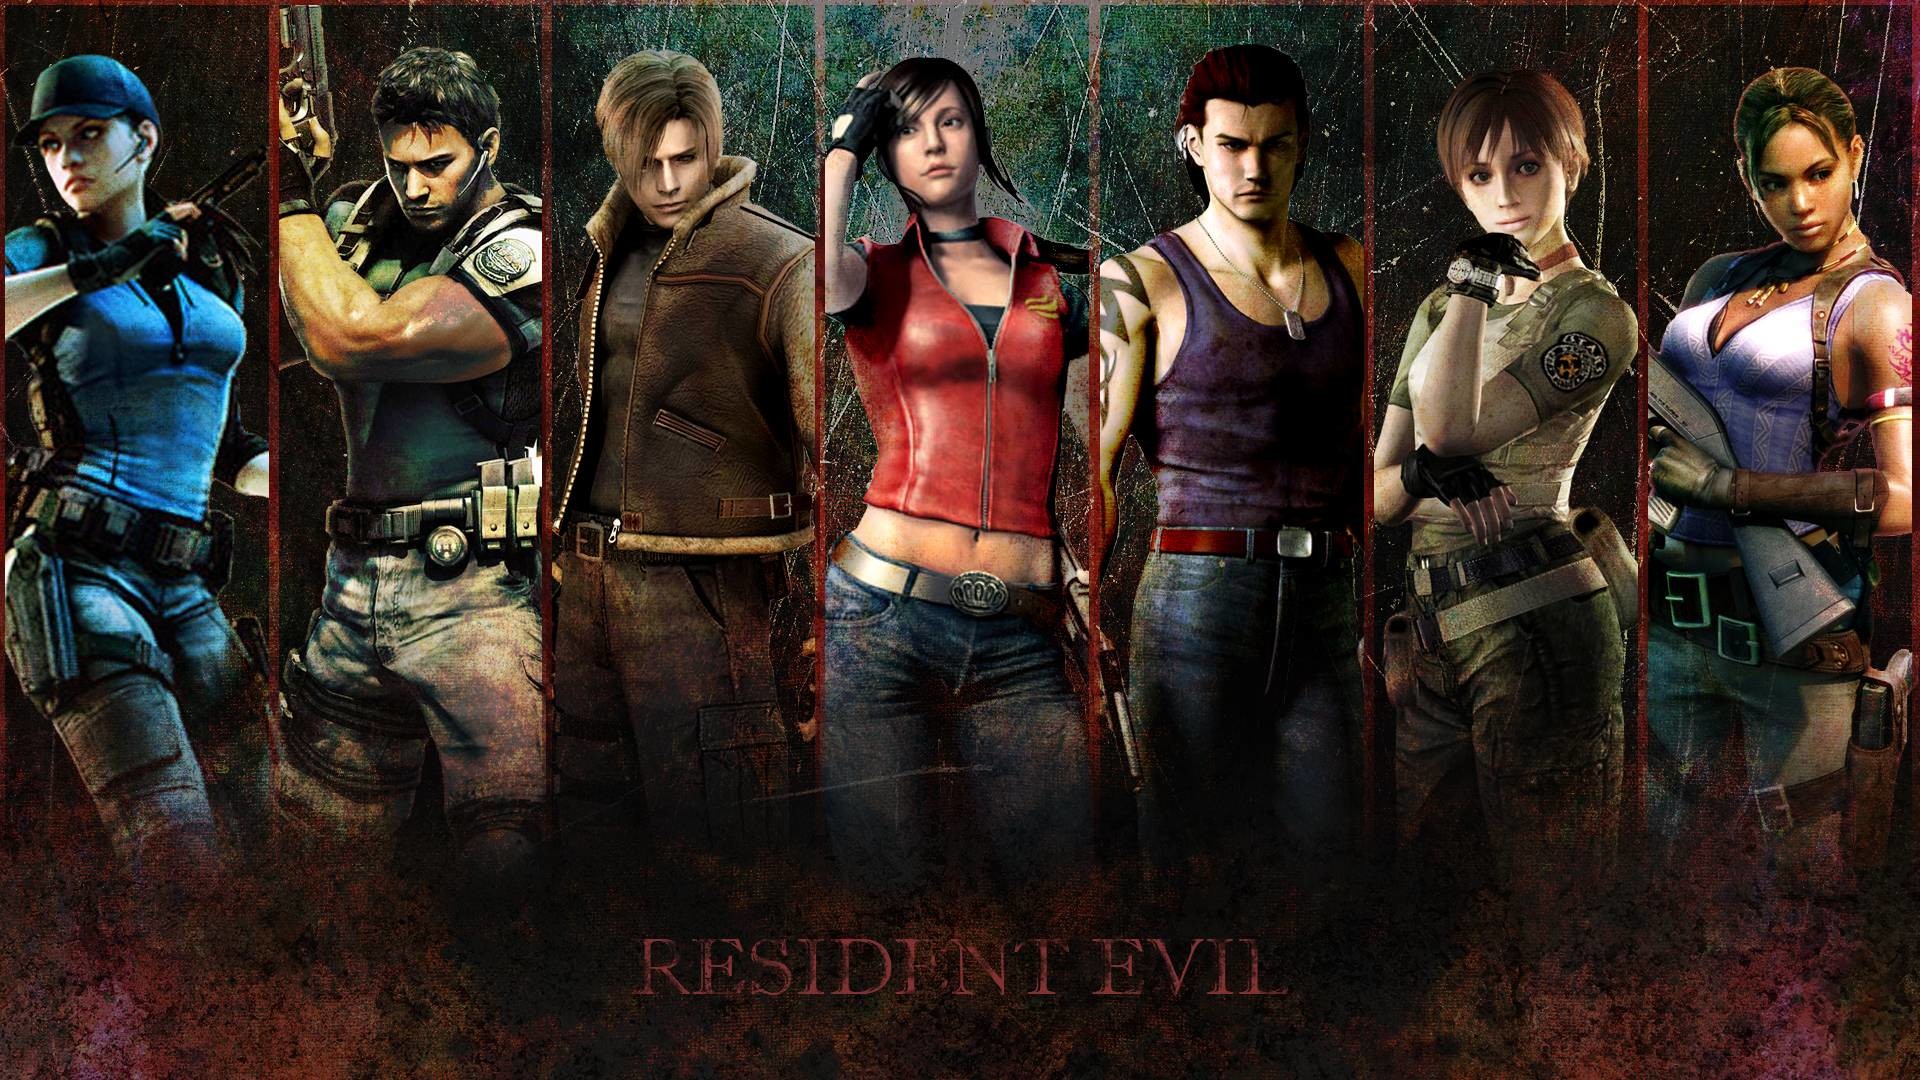 1920x1080 Resident Evil Wallpapers: Excellent Wallpapers to Use